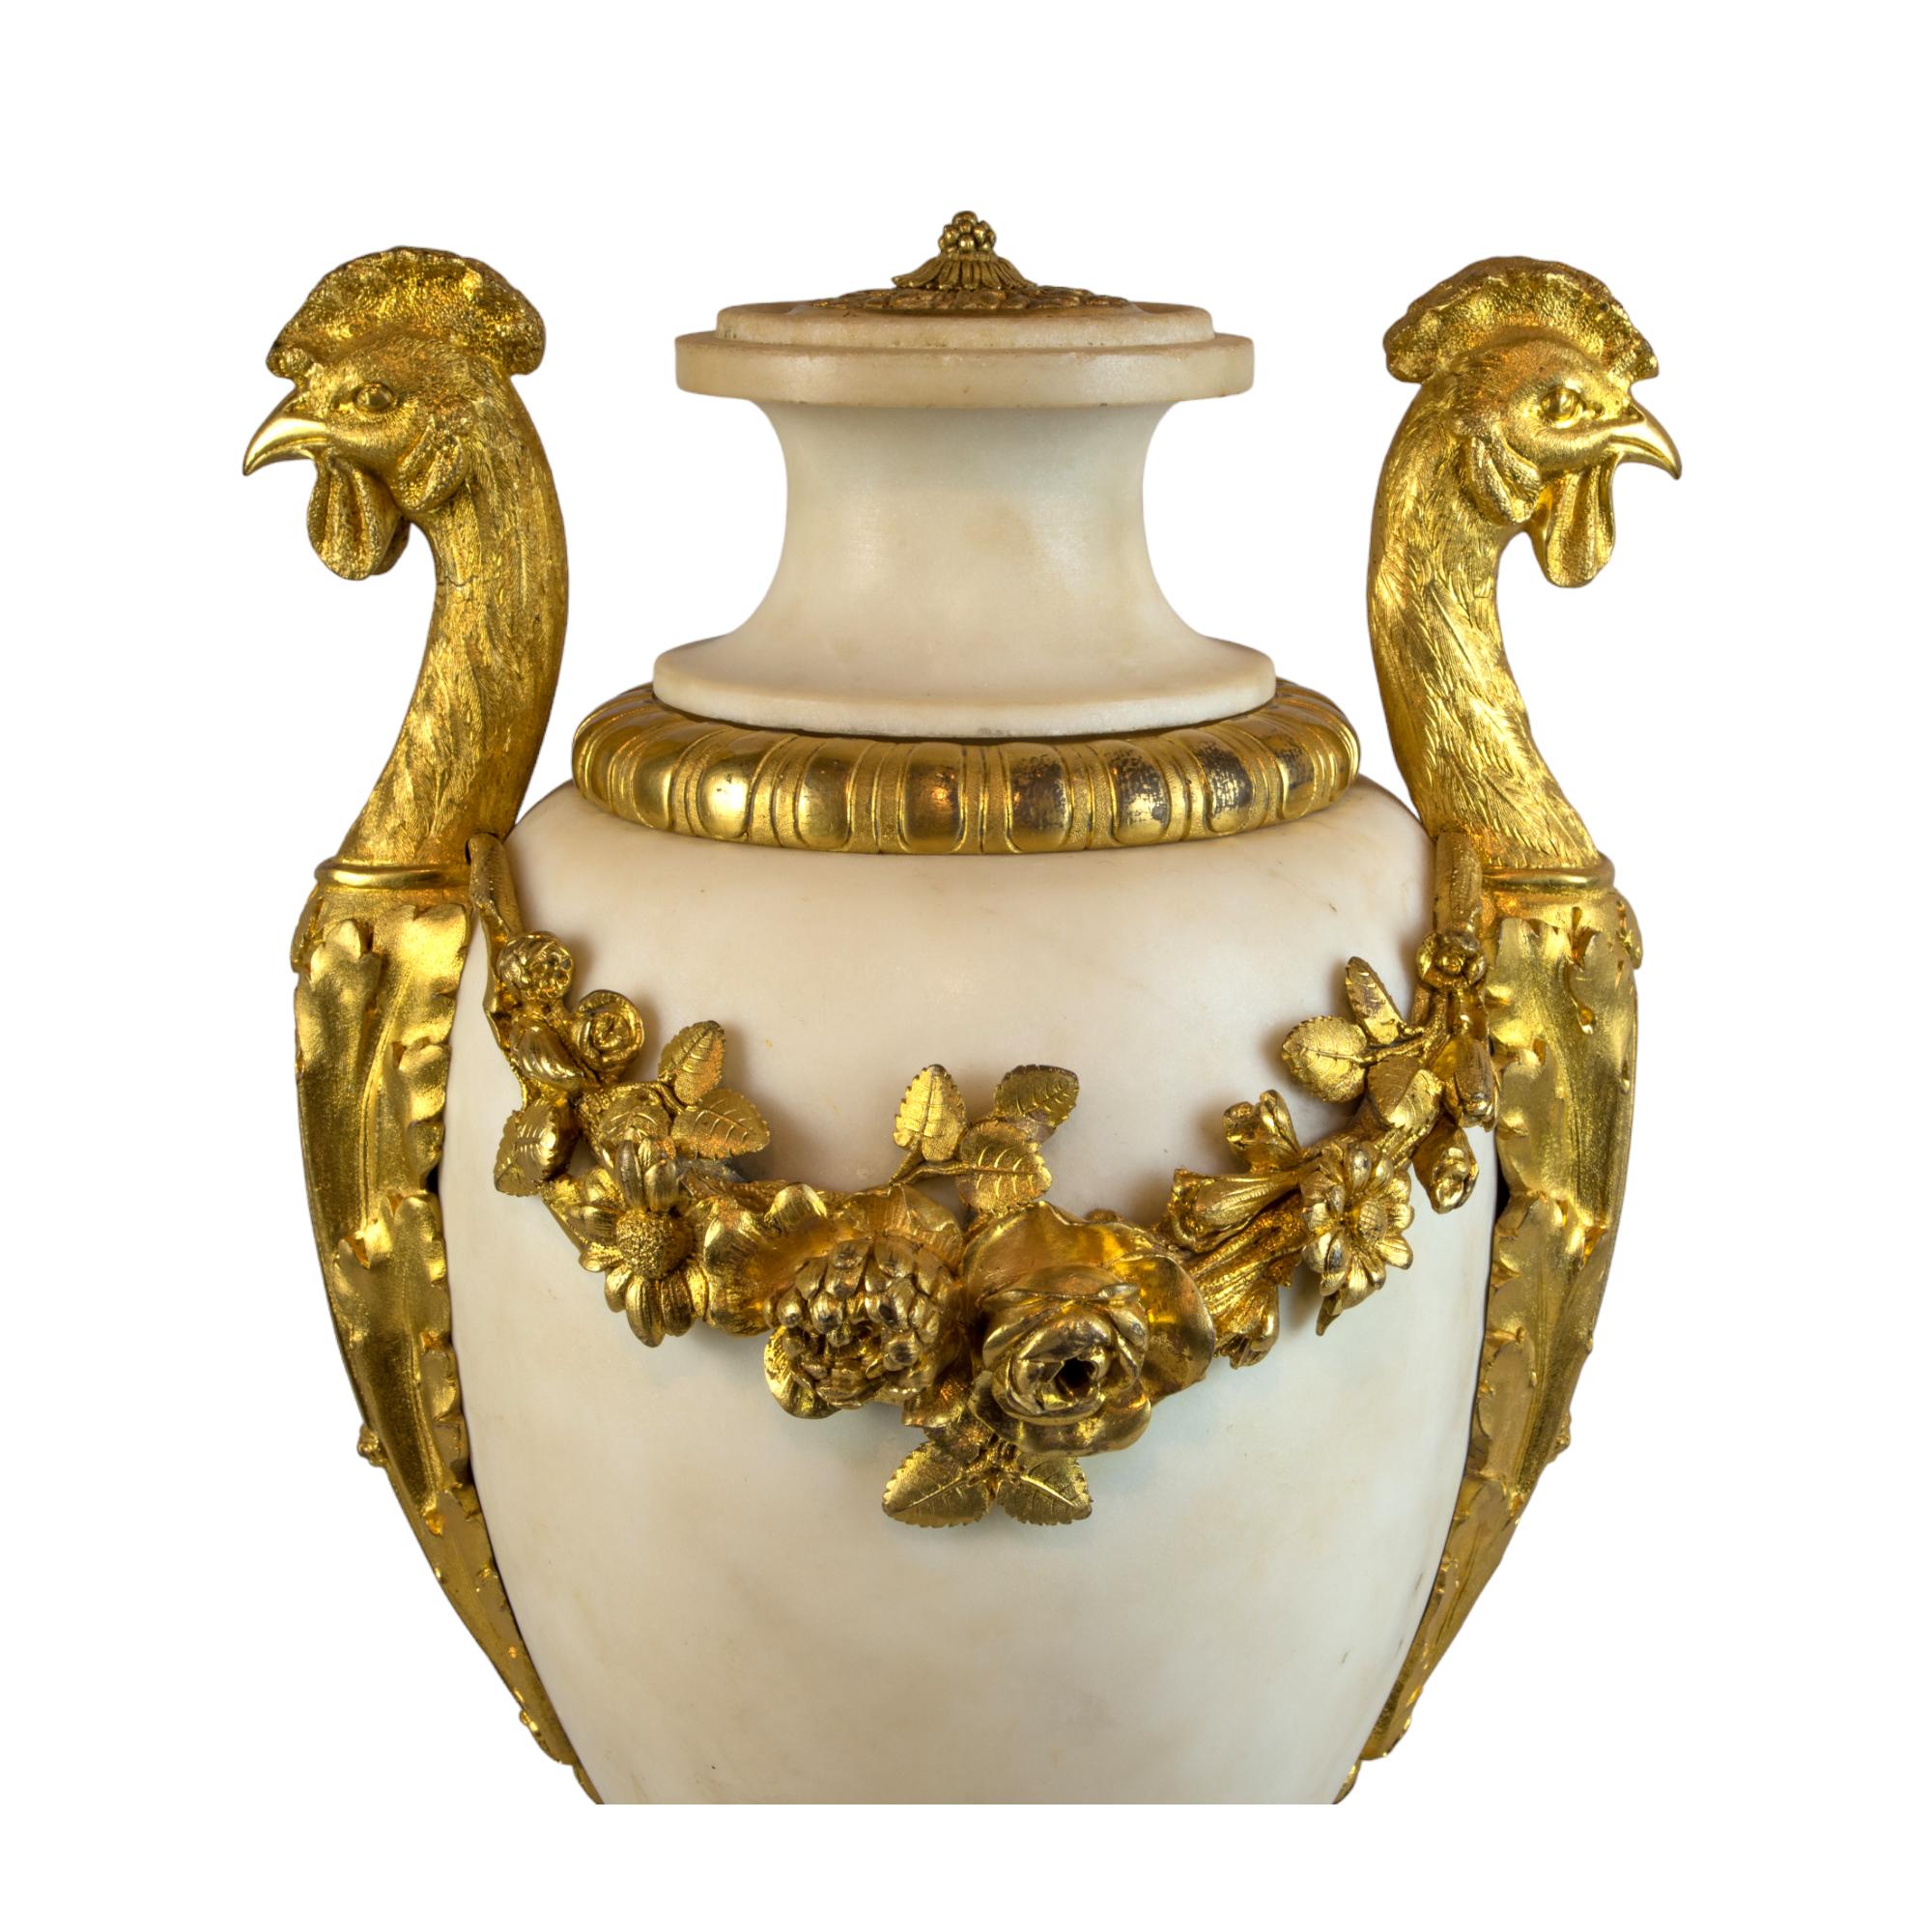 Magnificent Pair of Louis XVI Style Gilt-Bronze-Mounted White Marble Urns For Sale 1